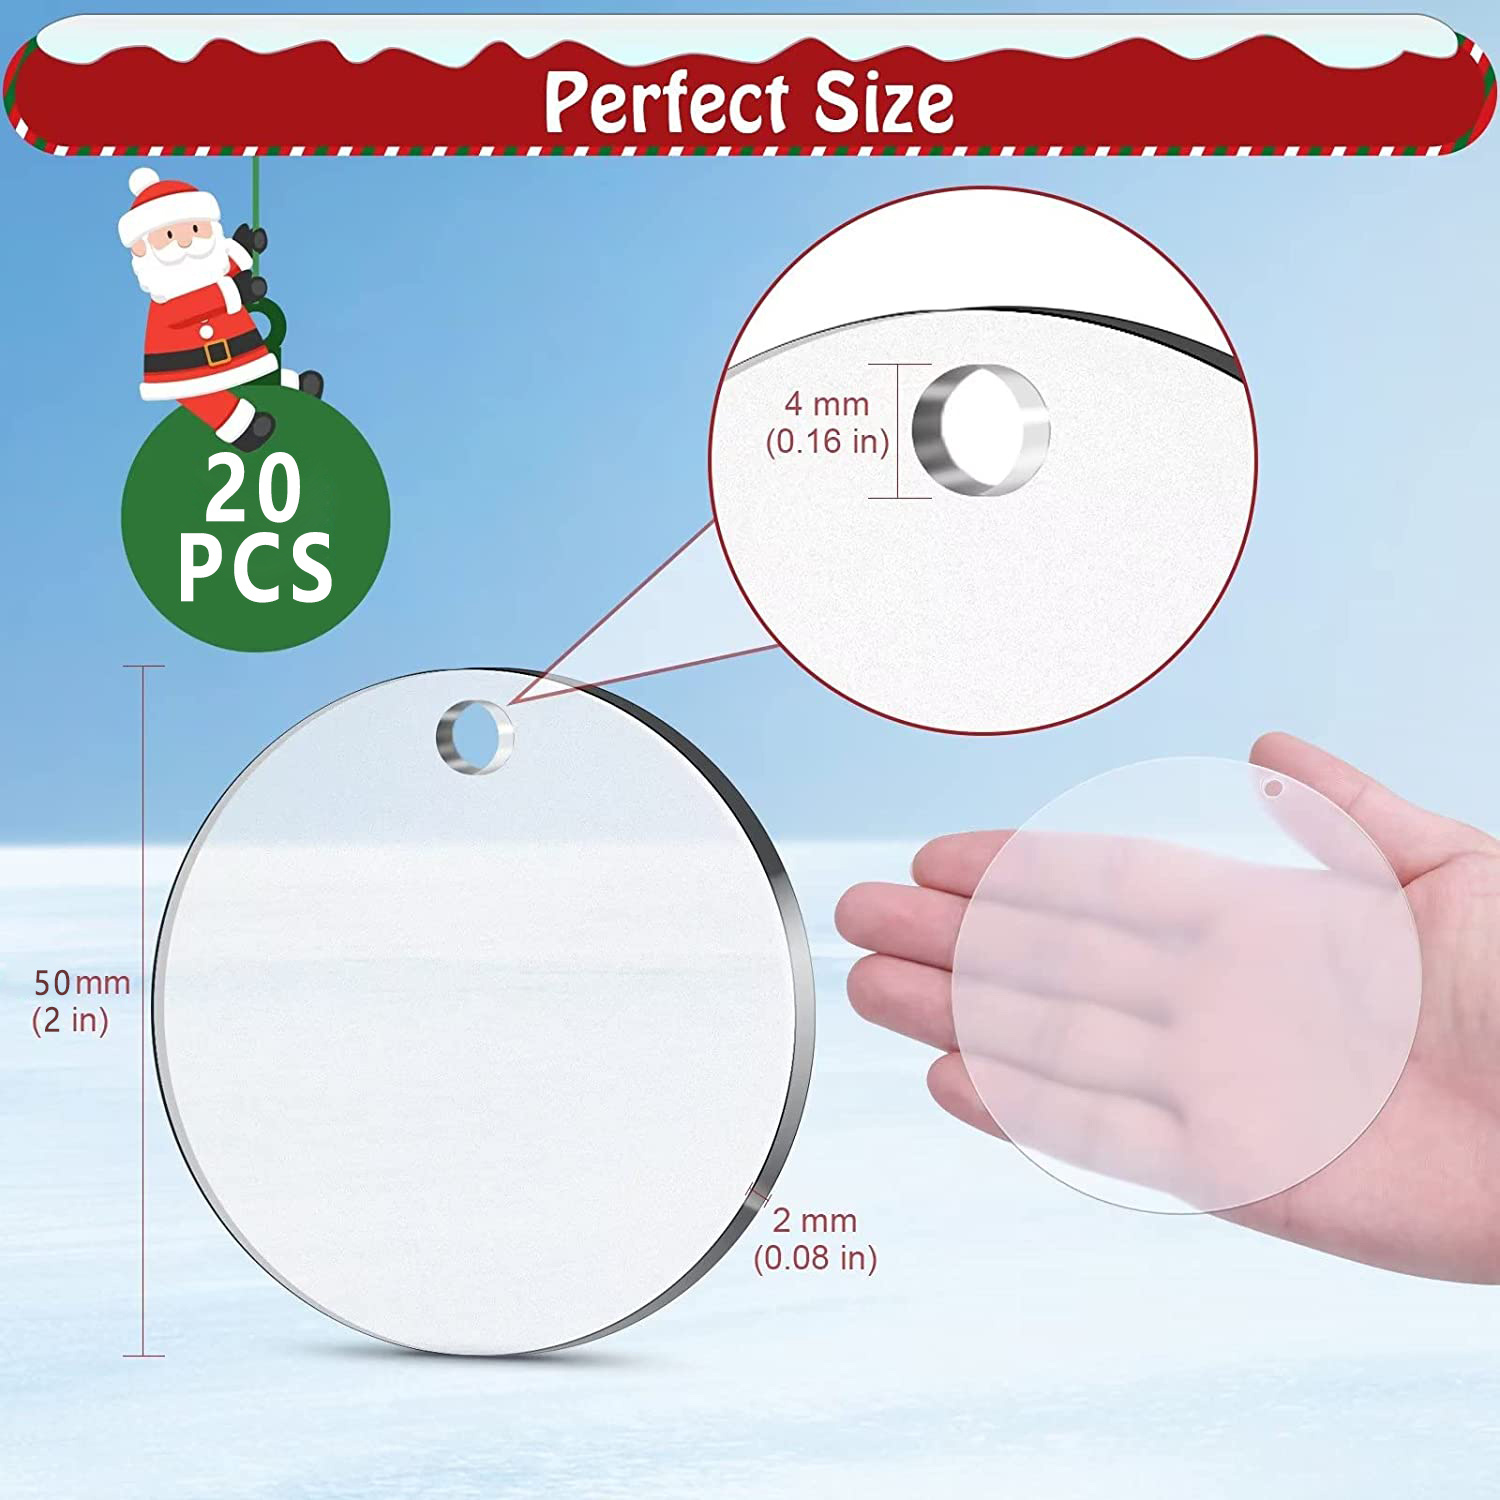 Bright Creations 20 Pieces Acrylic Circle Keychain Blanks, 3.5 Round Clear Discs with 10 Metal Rings for Christmas Ornaments, DIY Crafts